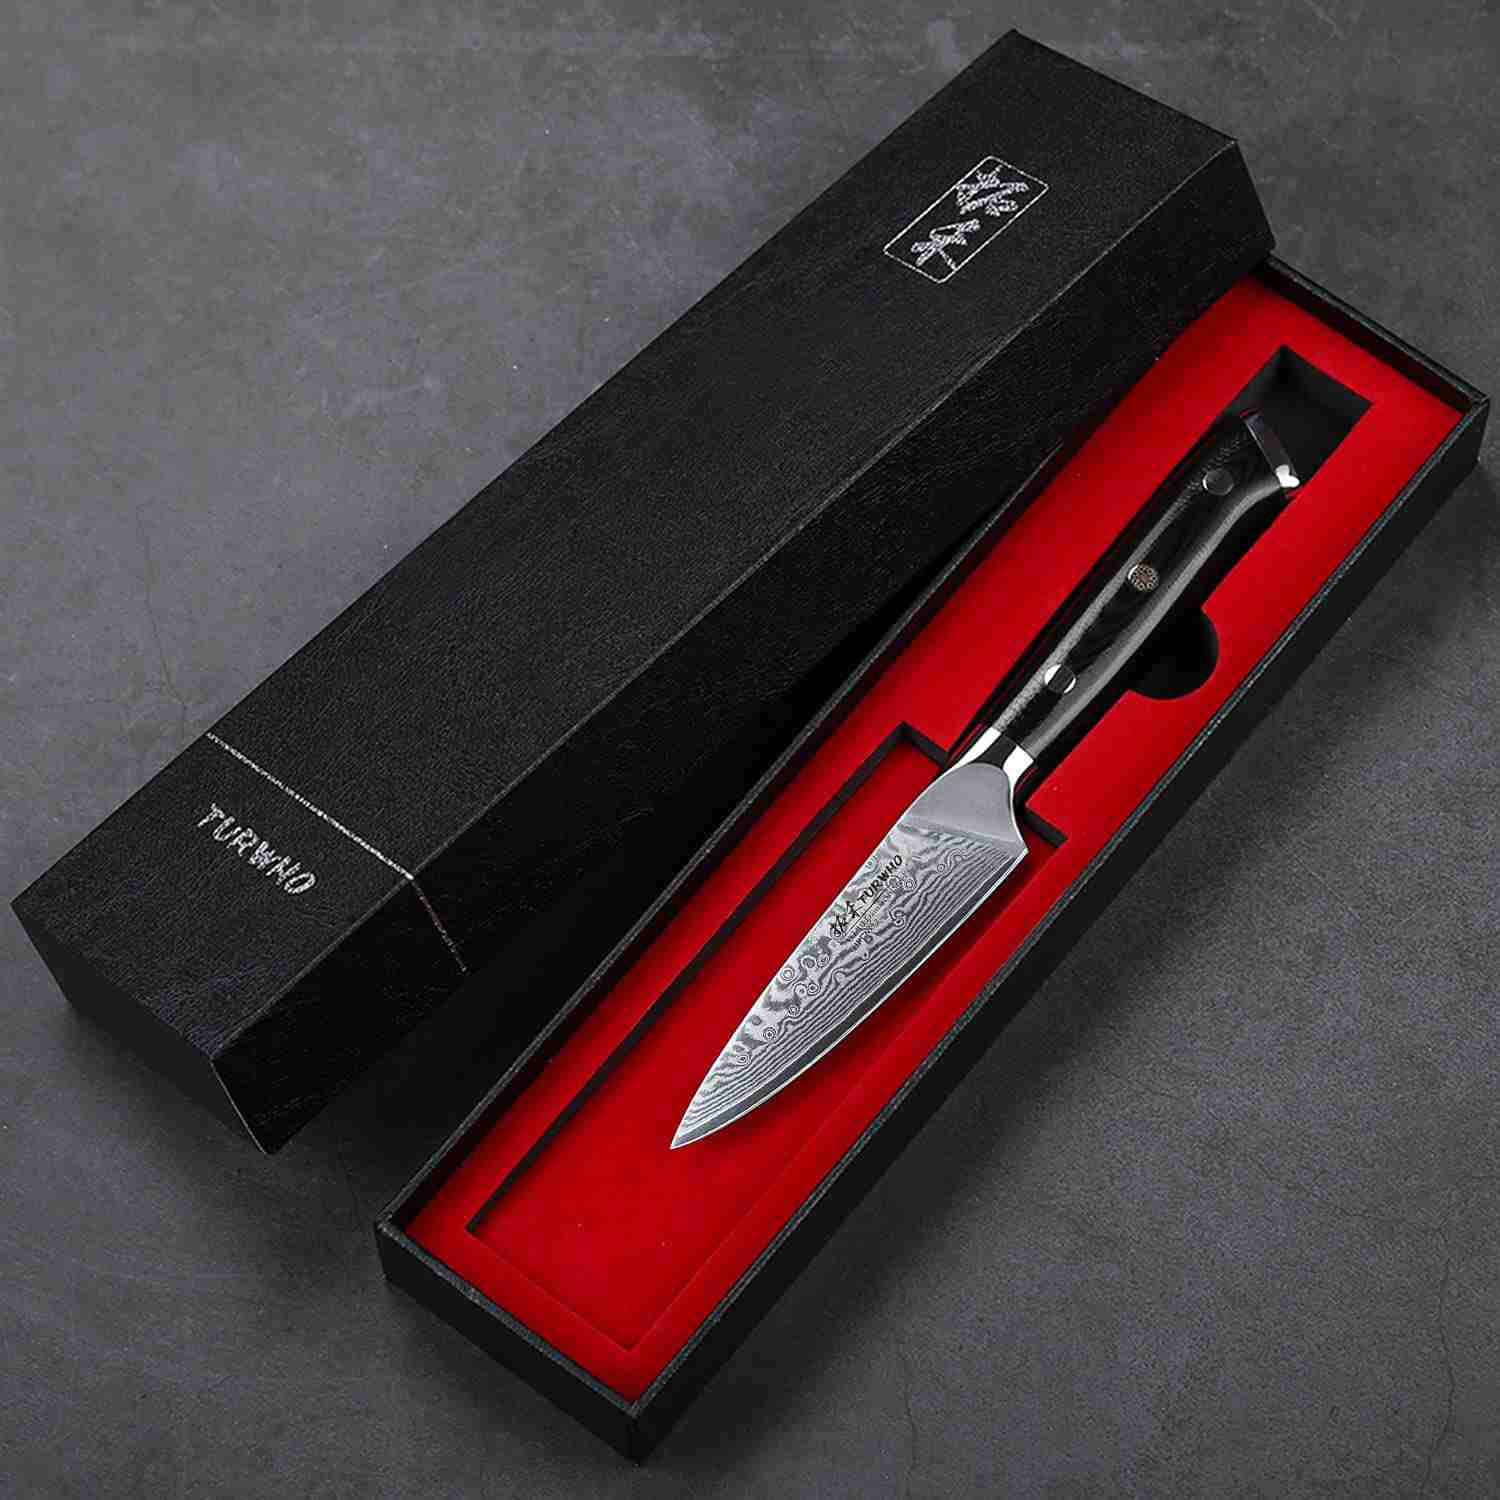 paring-knife with discount code